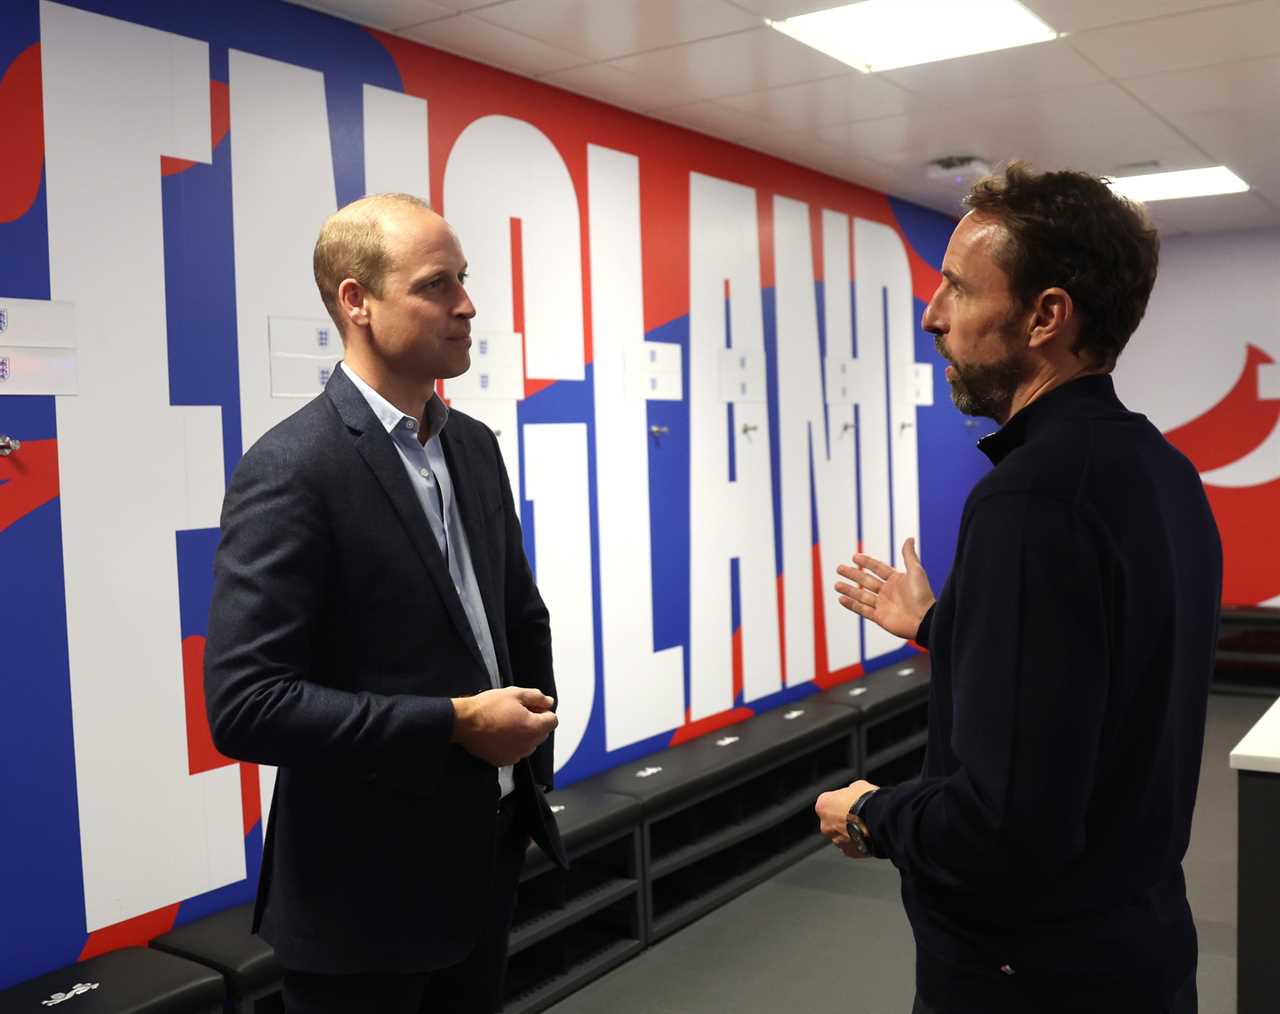 Prince William discusses tactics with England footie boss Gareth Southgate and casts eyes over potential future stars